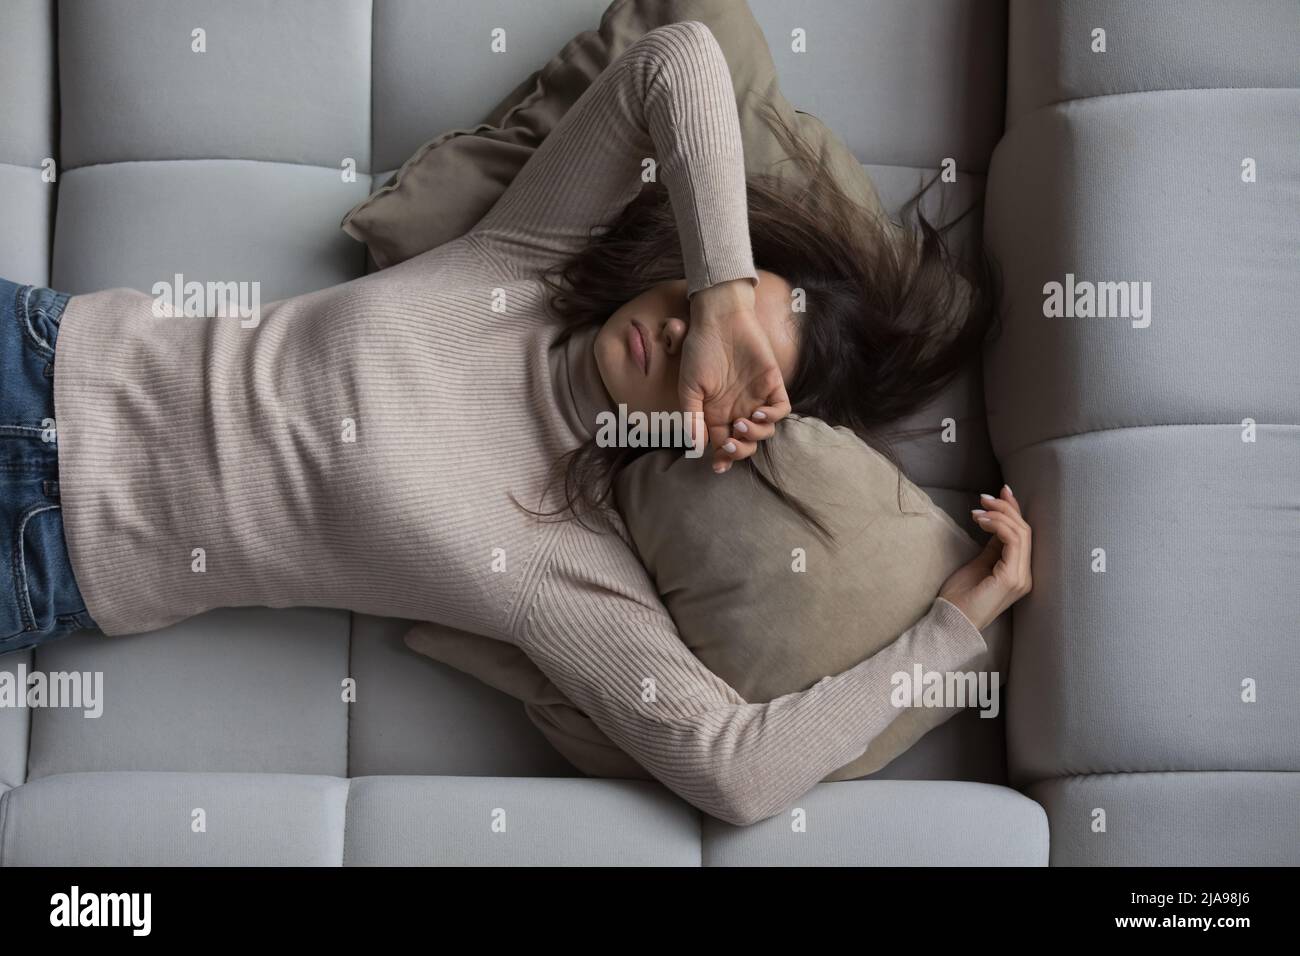 Peaceful girl lying on back on comfortable couch at home Stock Photo